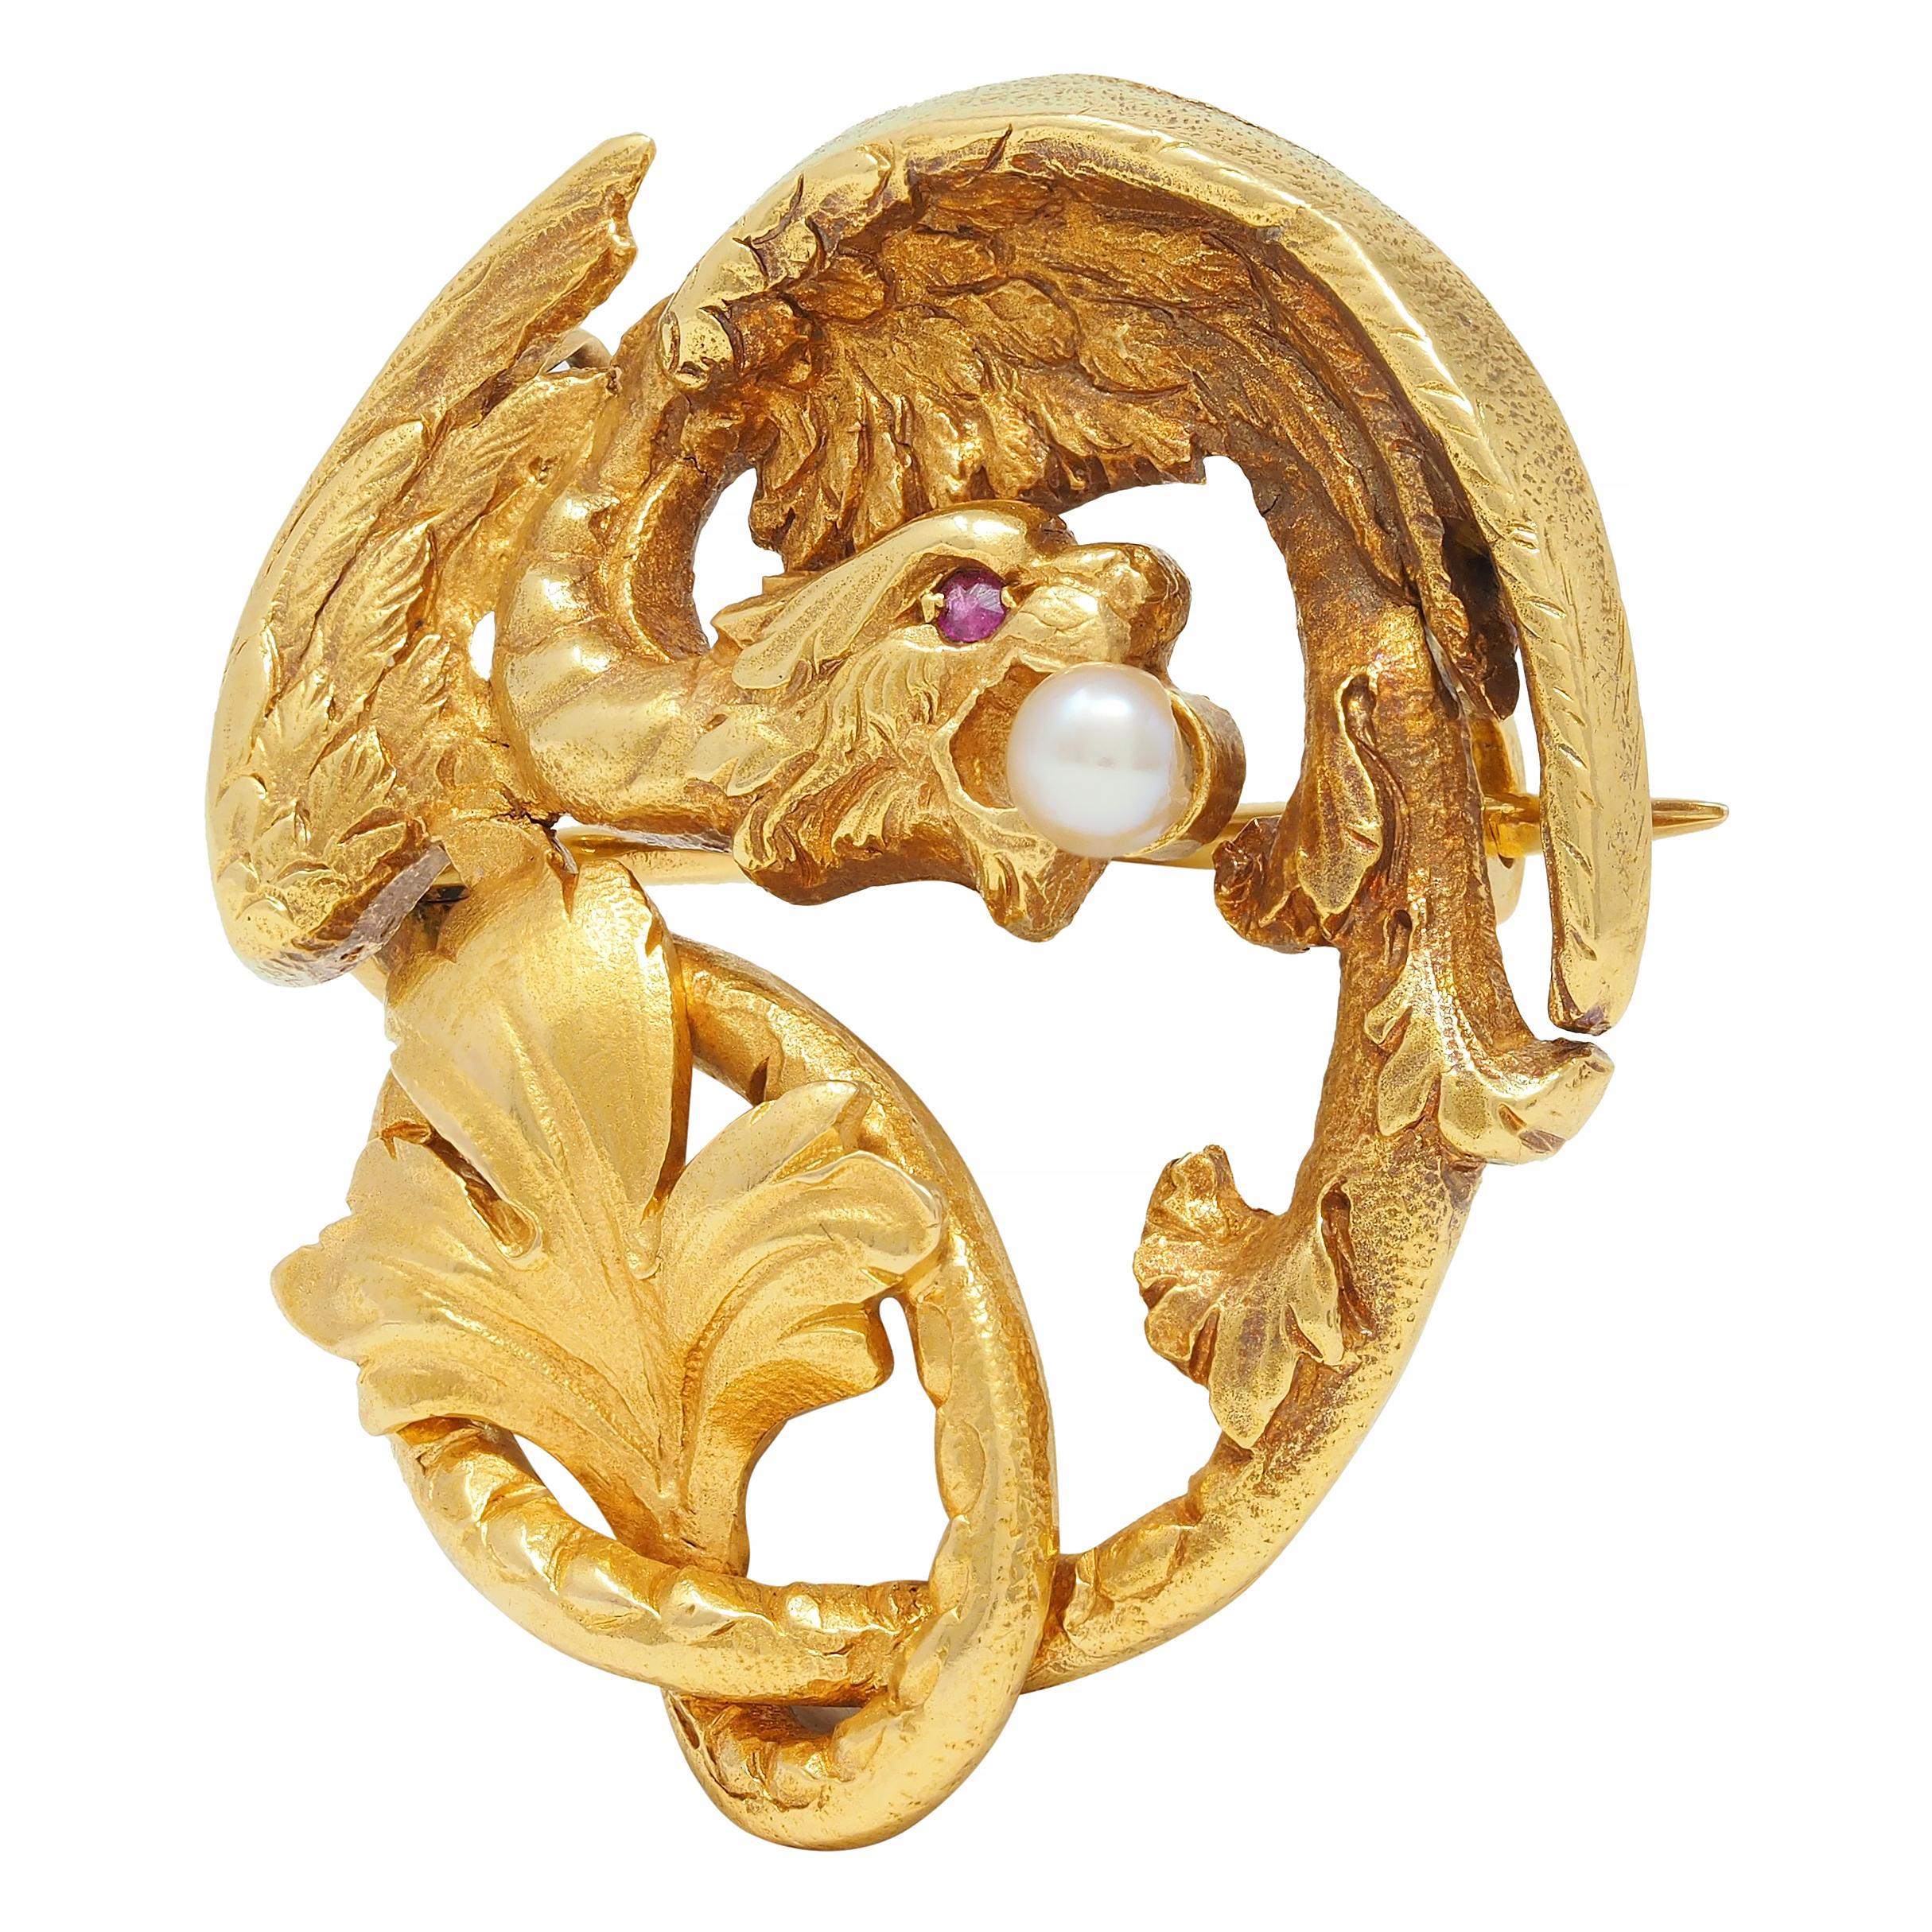 Designed as a highly rendered stylized depiction of a griffin winding in a circle 
With lion head, wings, and knotted foliate tail - engraved with texture
Featuring a 3.0 mm round pearl clutched in its mouth 
Cream in body color with strong